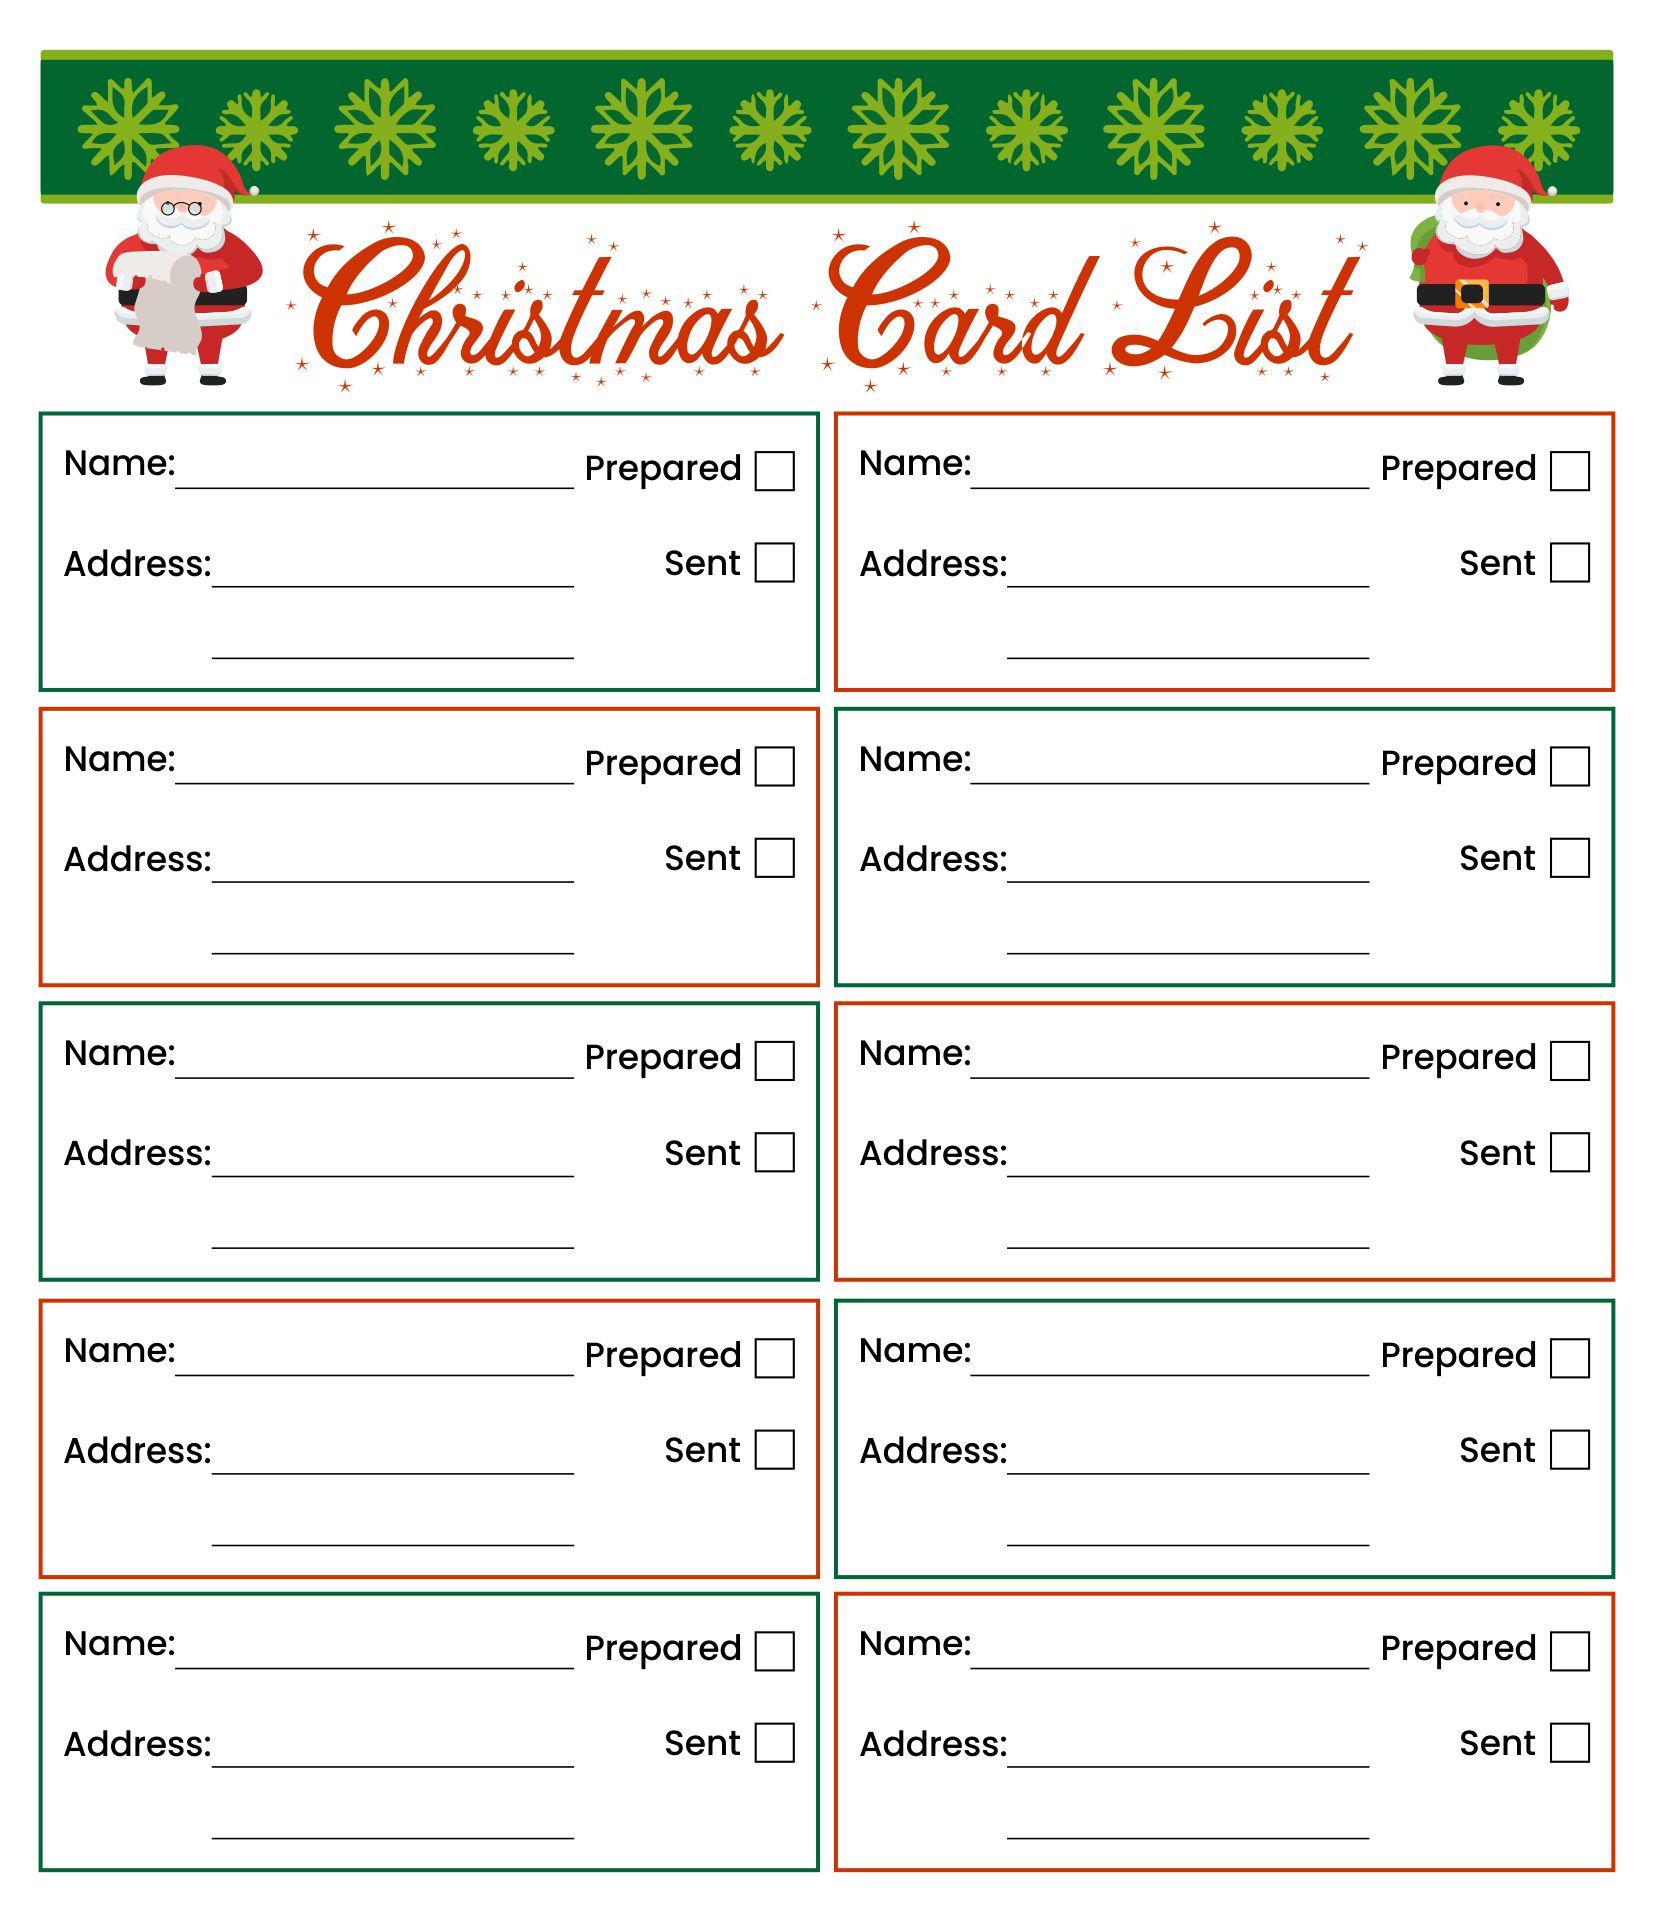 10-best-printable-list-christmas-card-templates-pdf-for-free-at-printablee